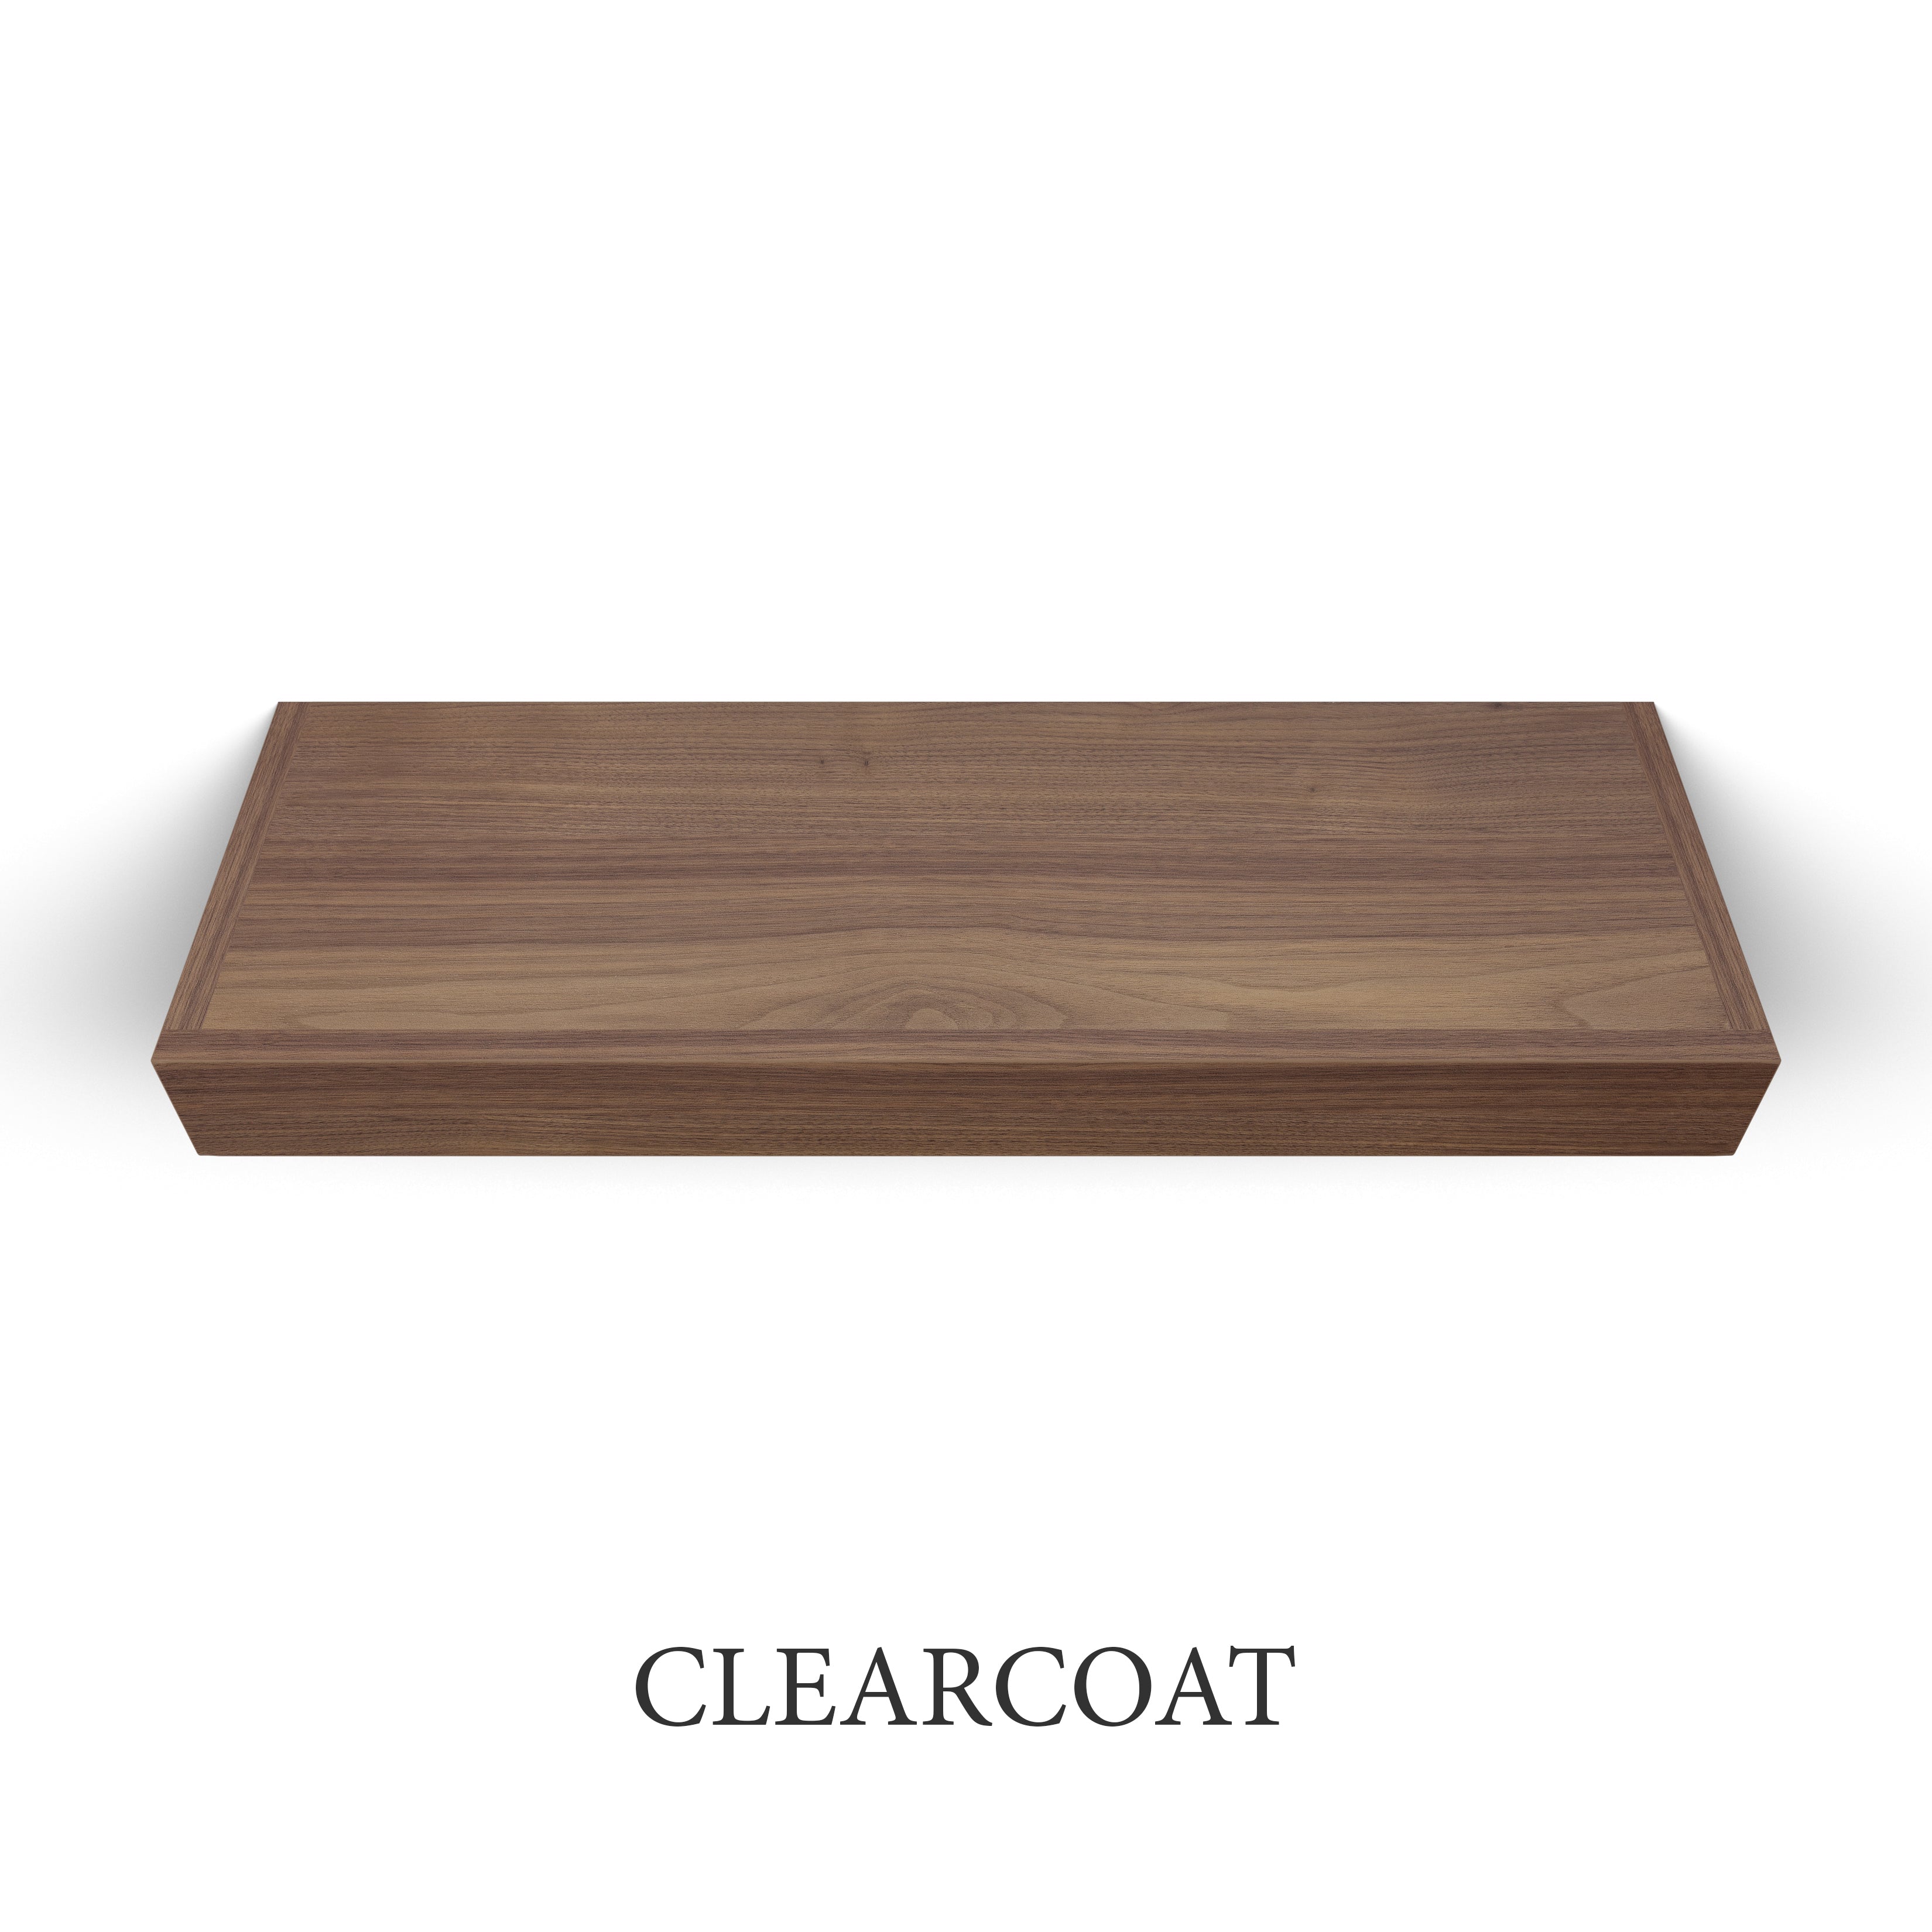 clearcoat Walnut 3 Inch Thick LED Lighted Floating Shelf - Hardwired